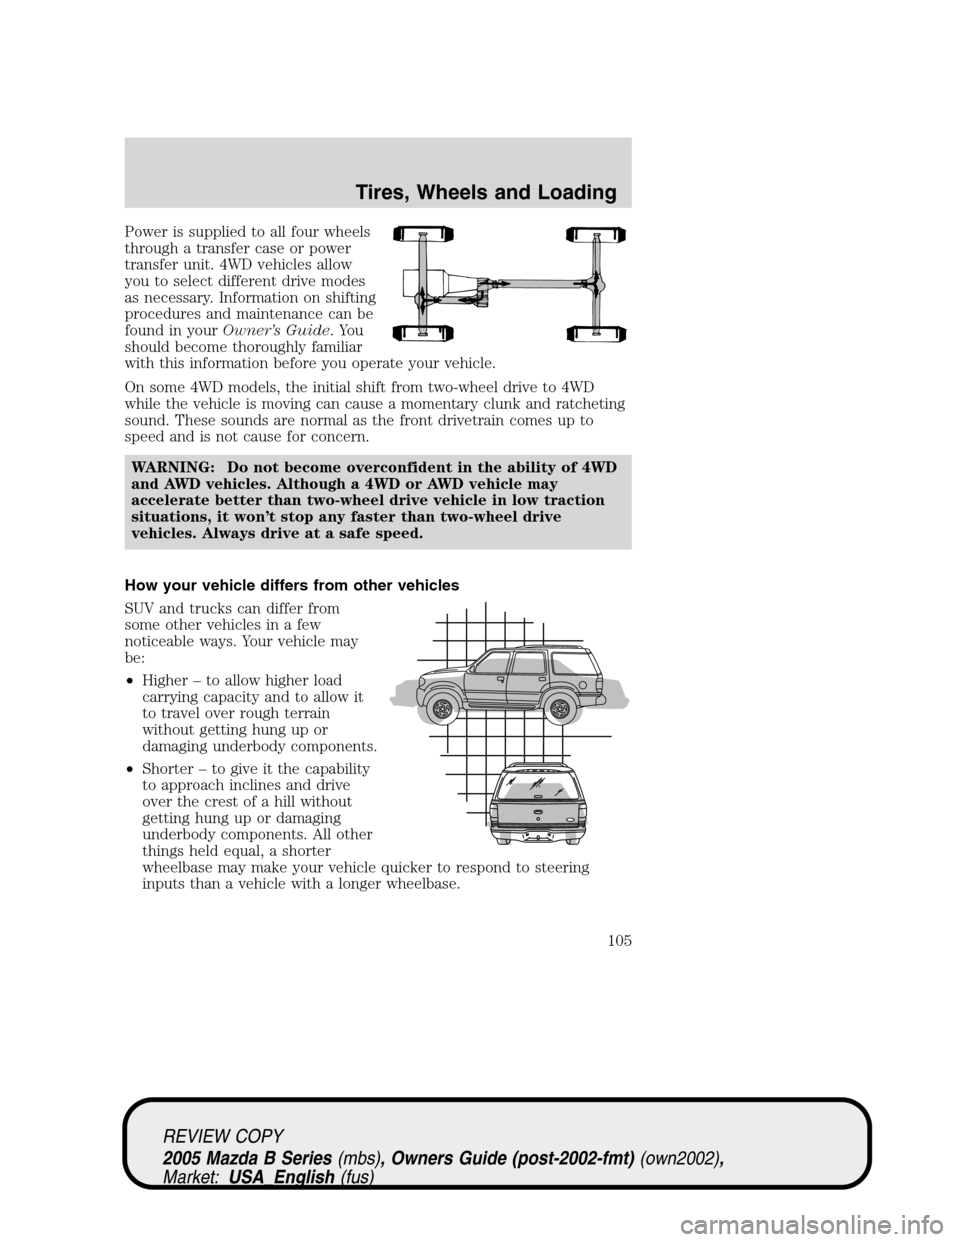 MAZDA MODEL B2300 TRUCK 2005  Owners Manual (in English) Power is supplied to all four wheels
through a transfer case or power
transfer unit. 4WD vehicles allow
you to select different drive modes
as necessary. Information on shifting
procedures and mainten